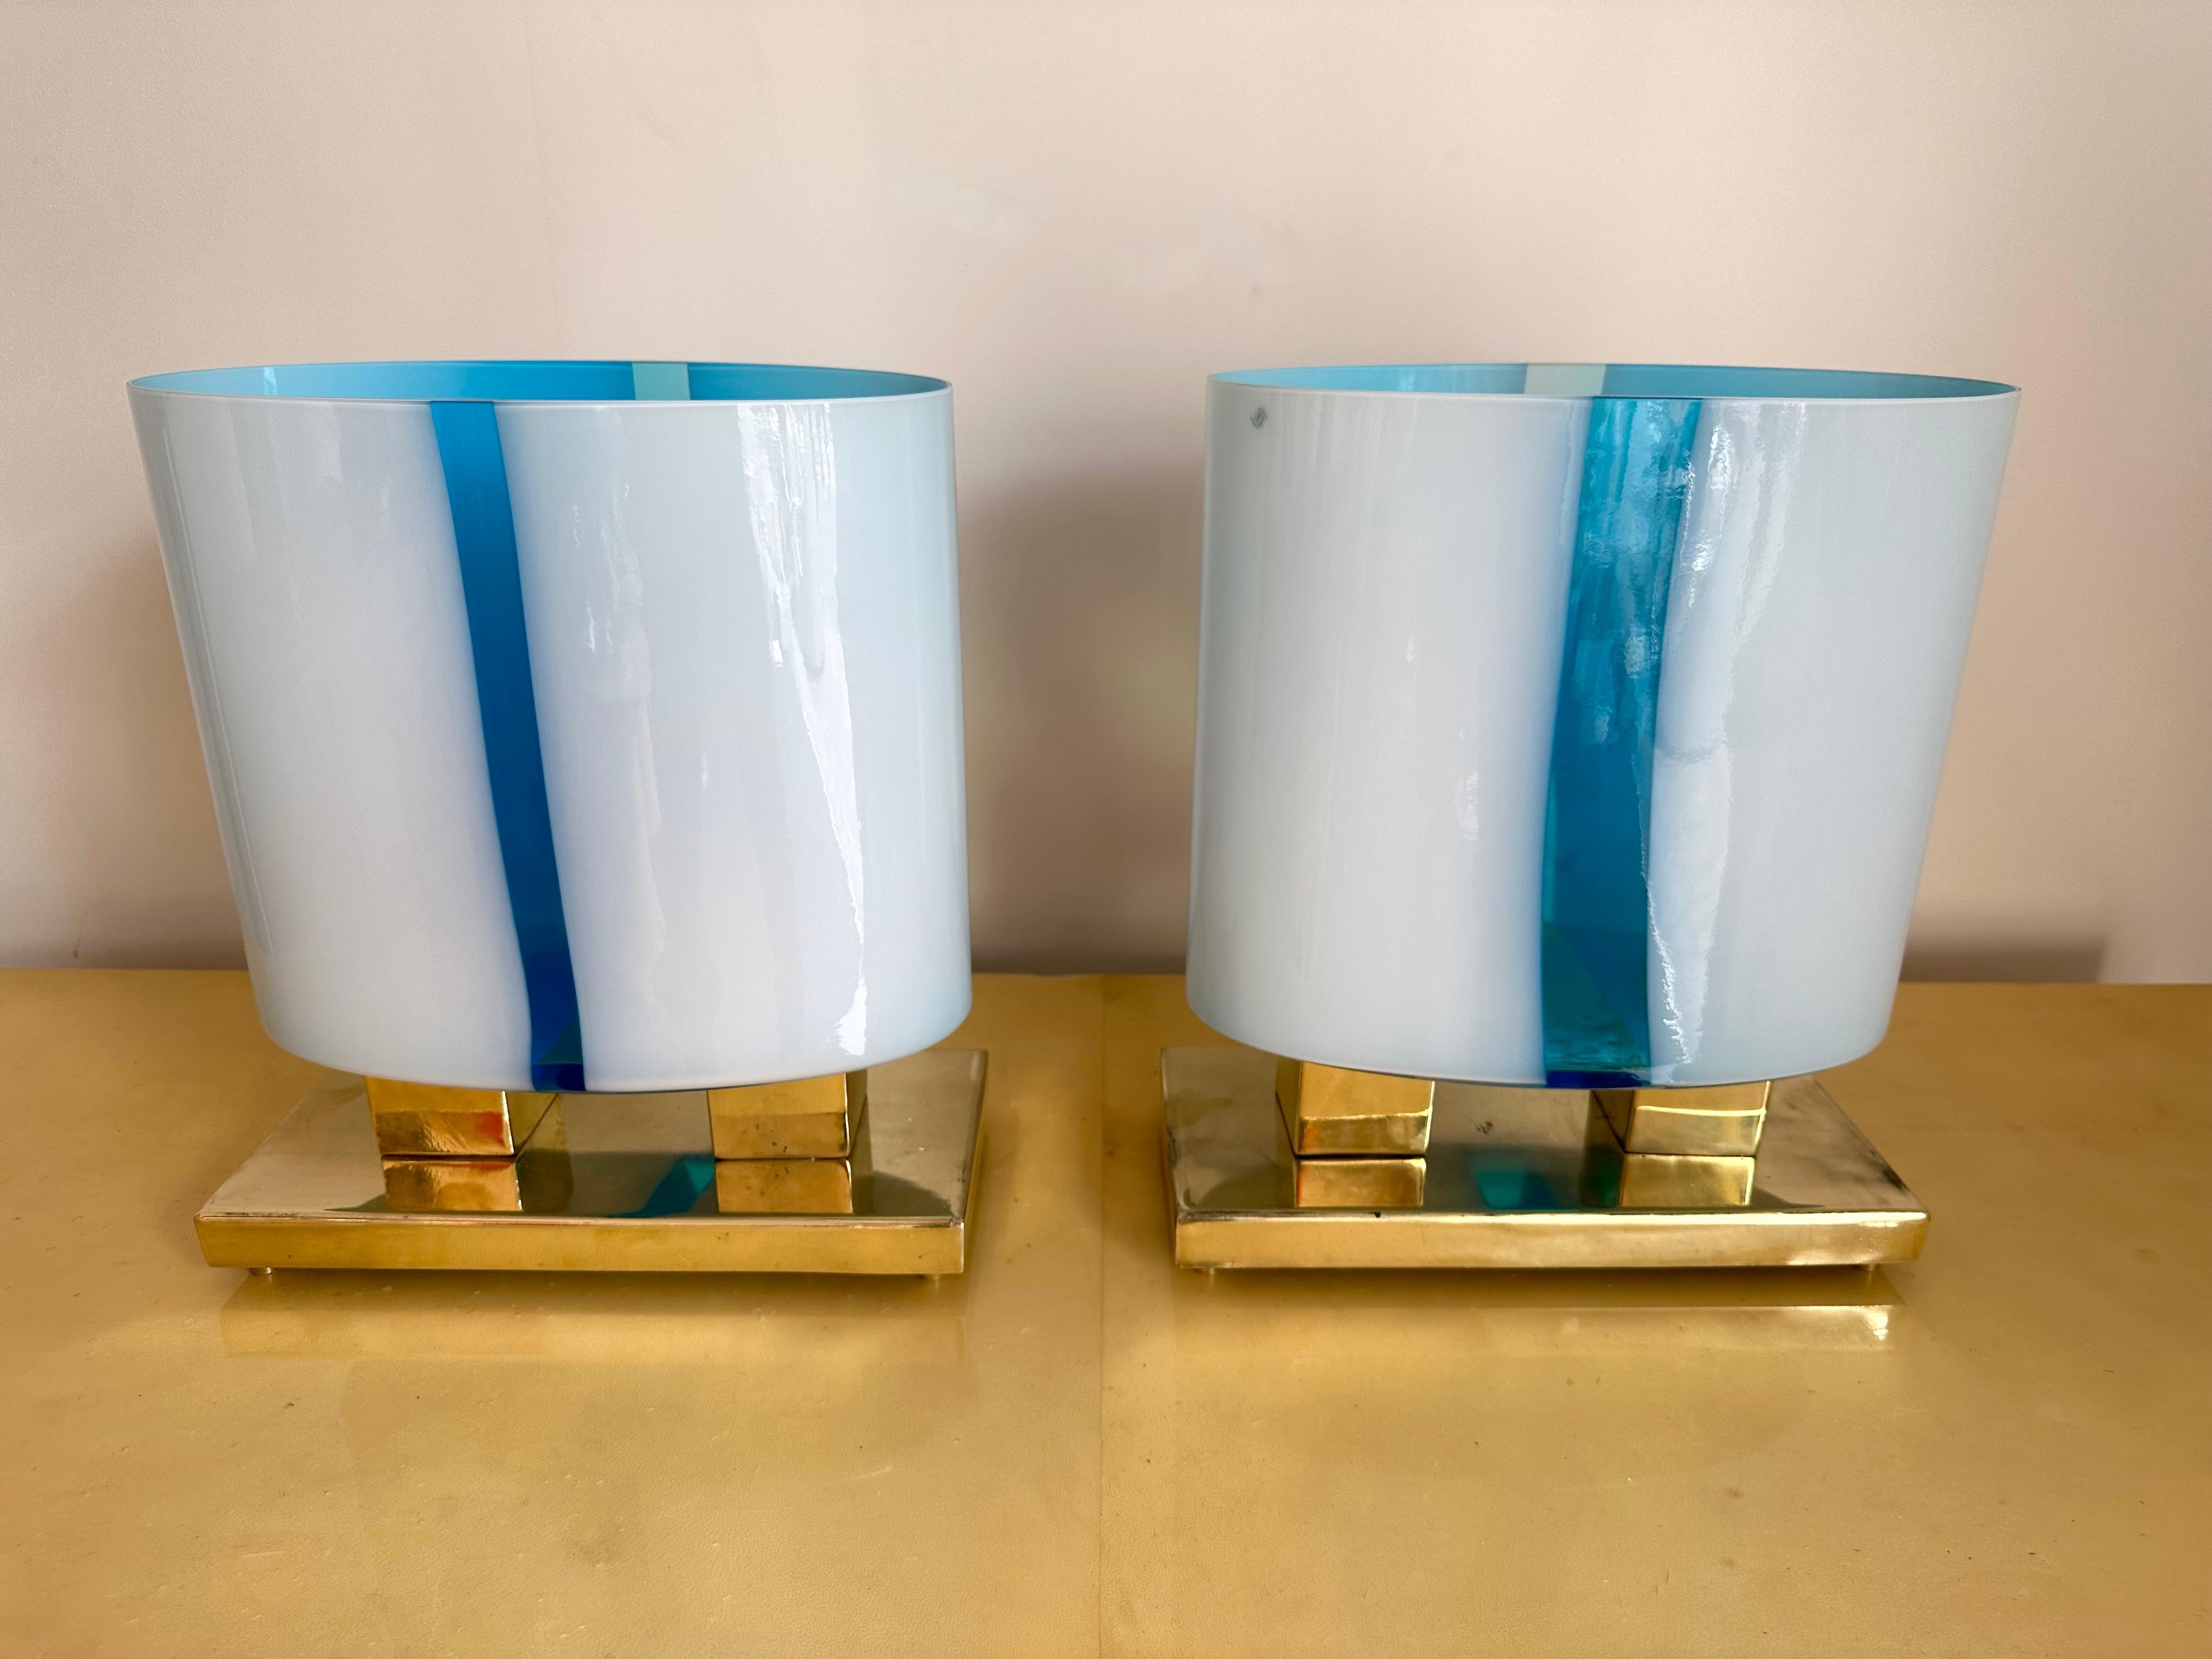 Pair of table or bedside brass lamps and blue Murano glass. Contemporary work from a small italian artisanal workshop in a Mid-Century Modern Space Age mood. Made with old stock of glass from the italian design manufacture Vistosi.